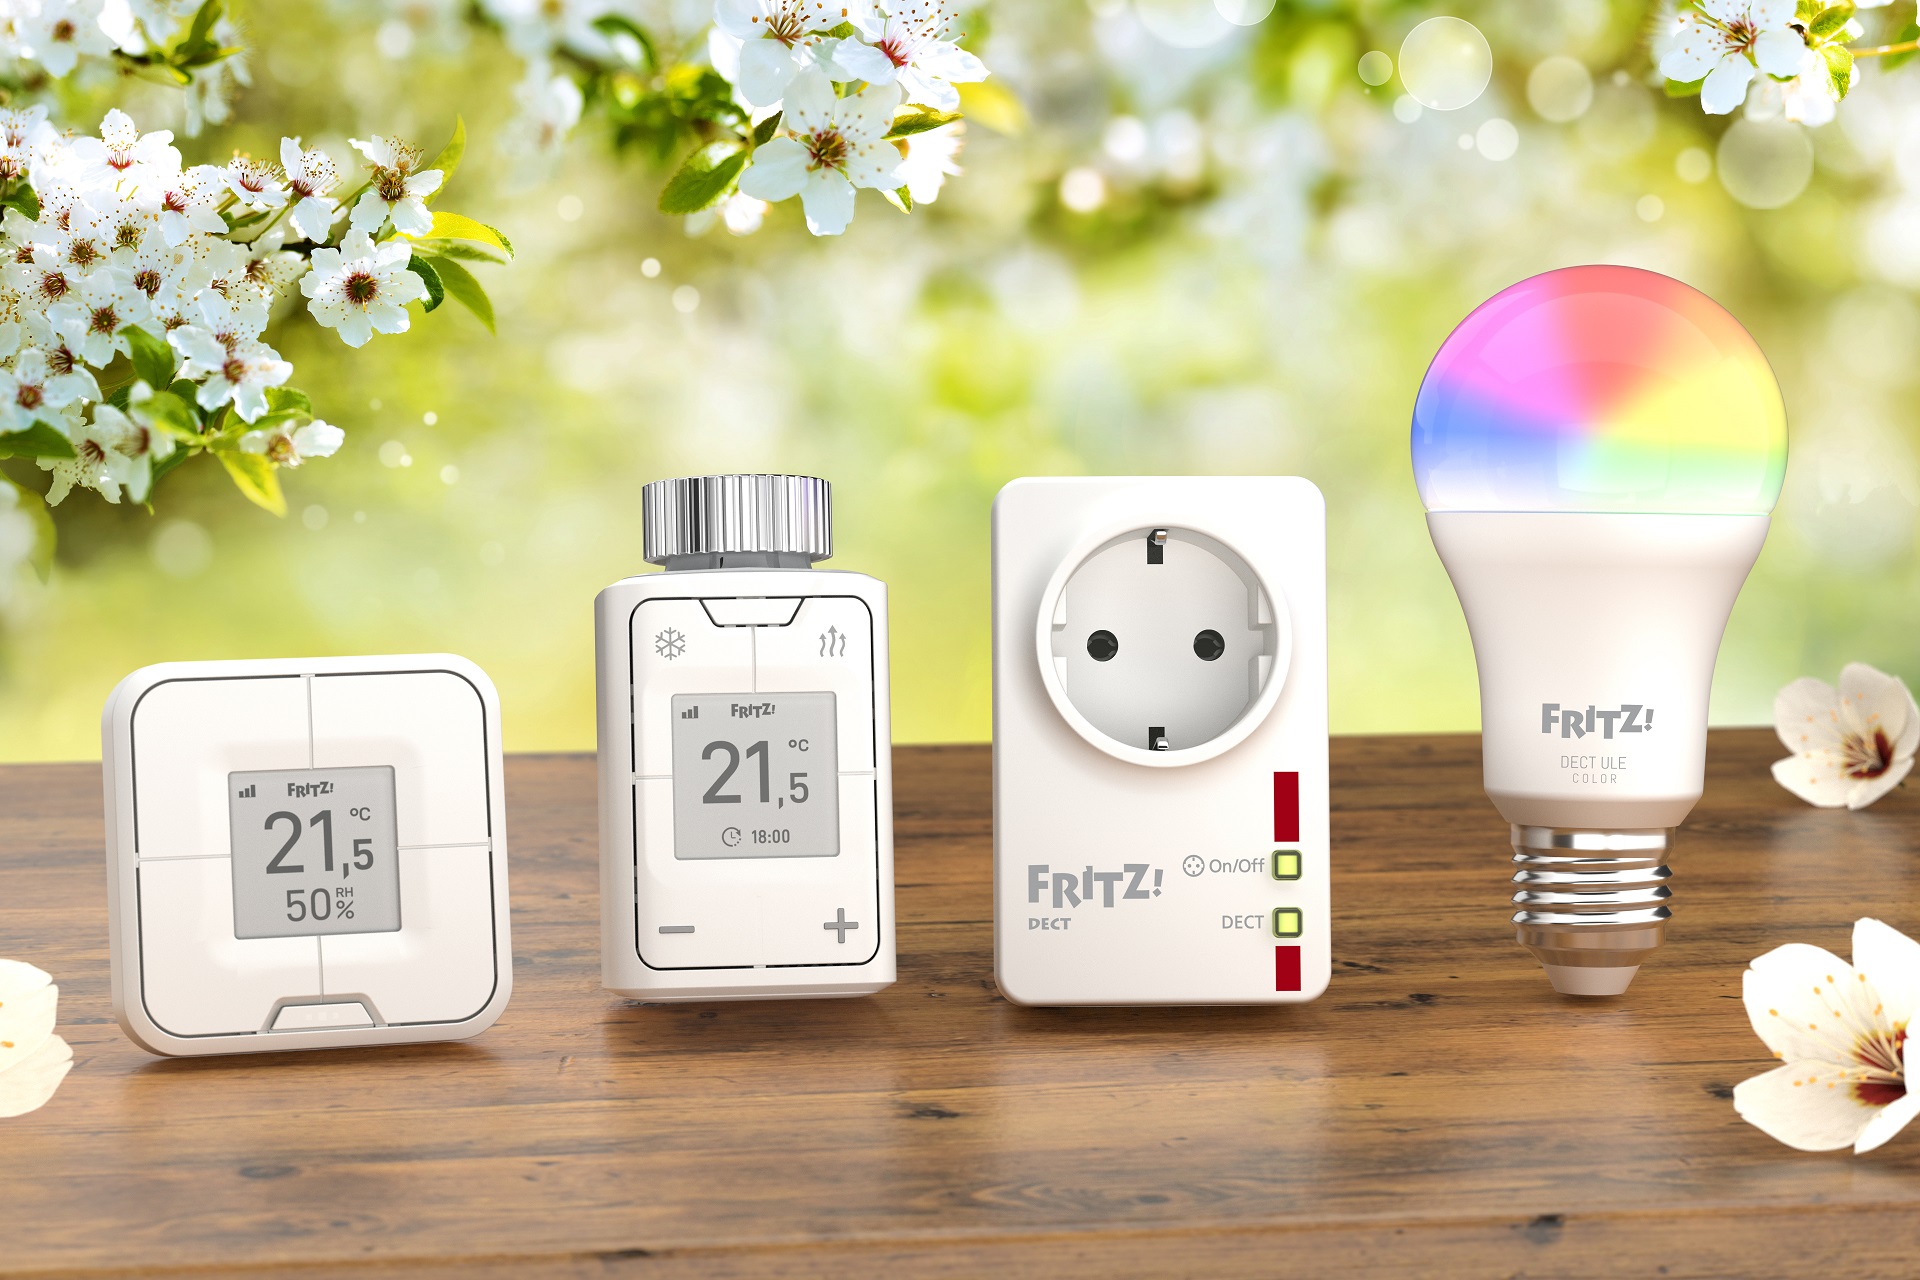 AVM FRITZ!DECT 302 (Intelligent Radiator Controller for the Home